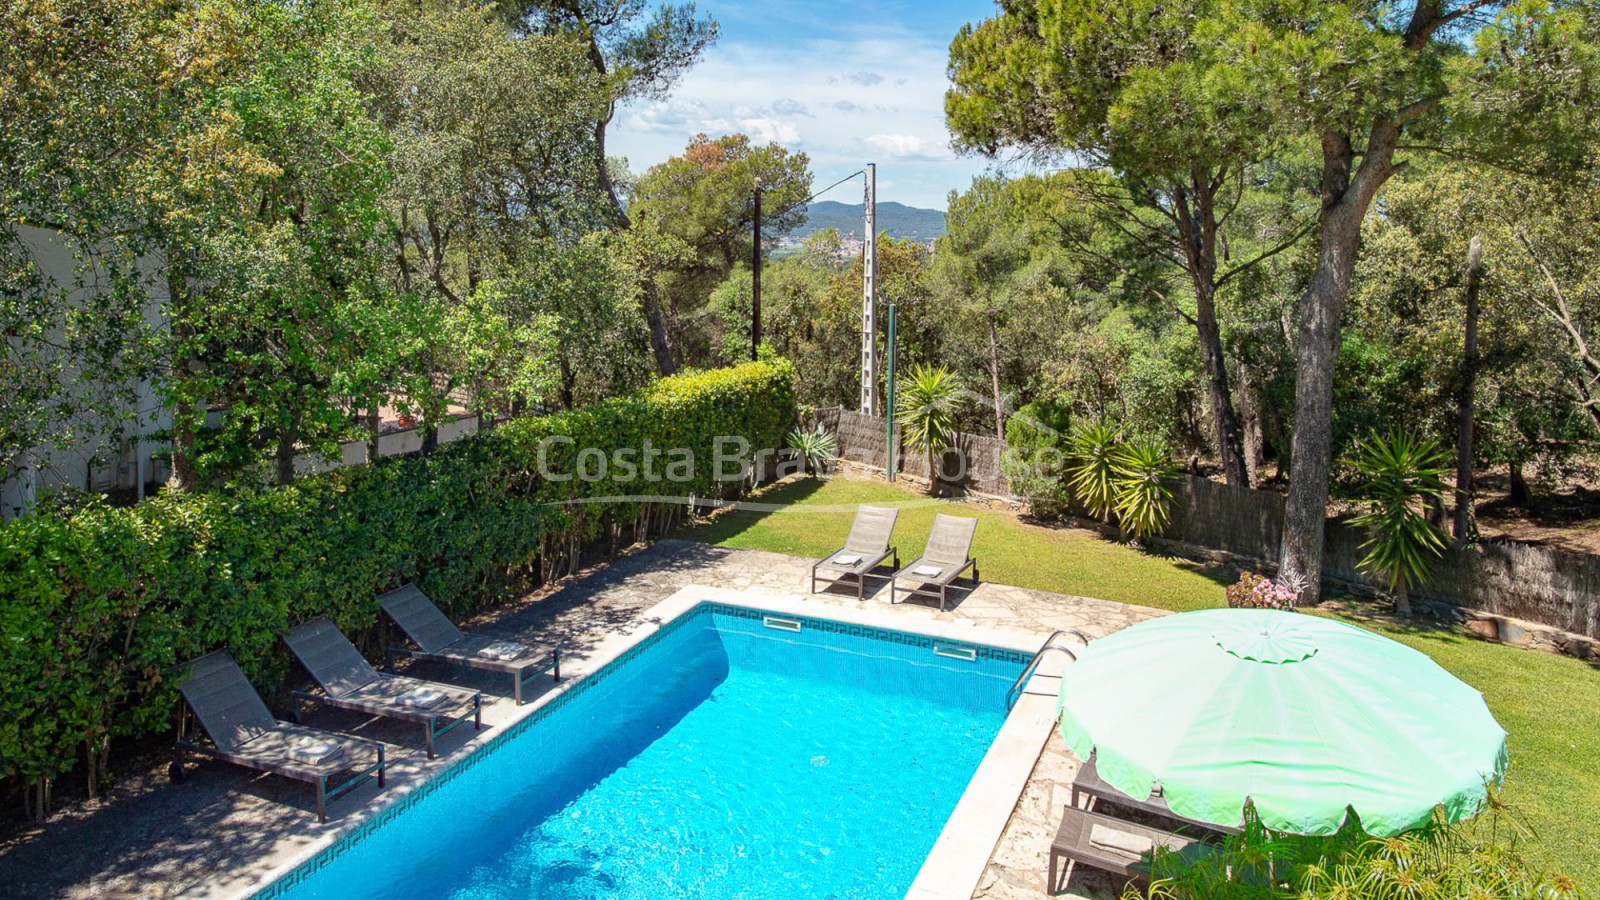 House with pool and garden in Llafranc, 5 minutes by car from the beach